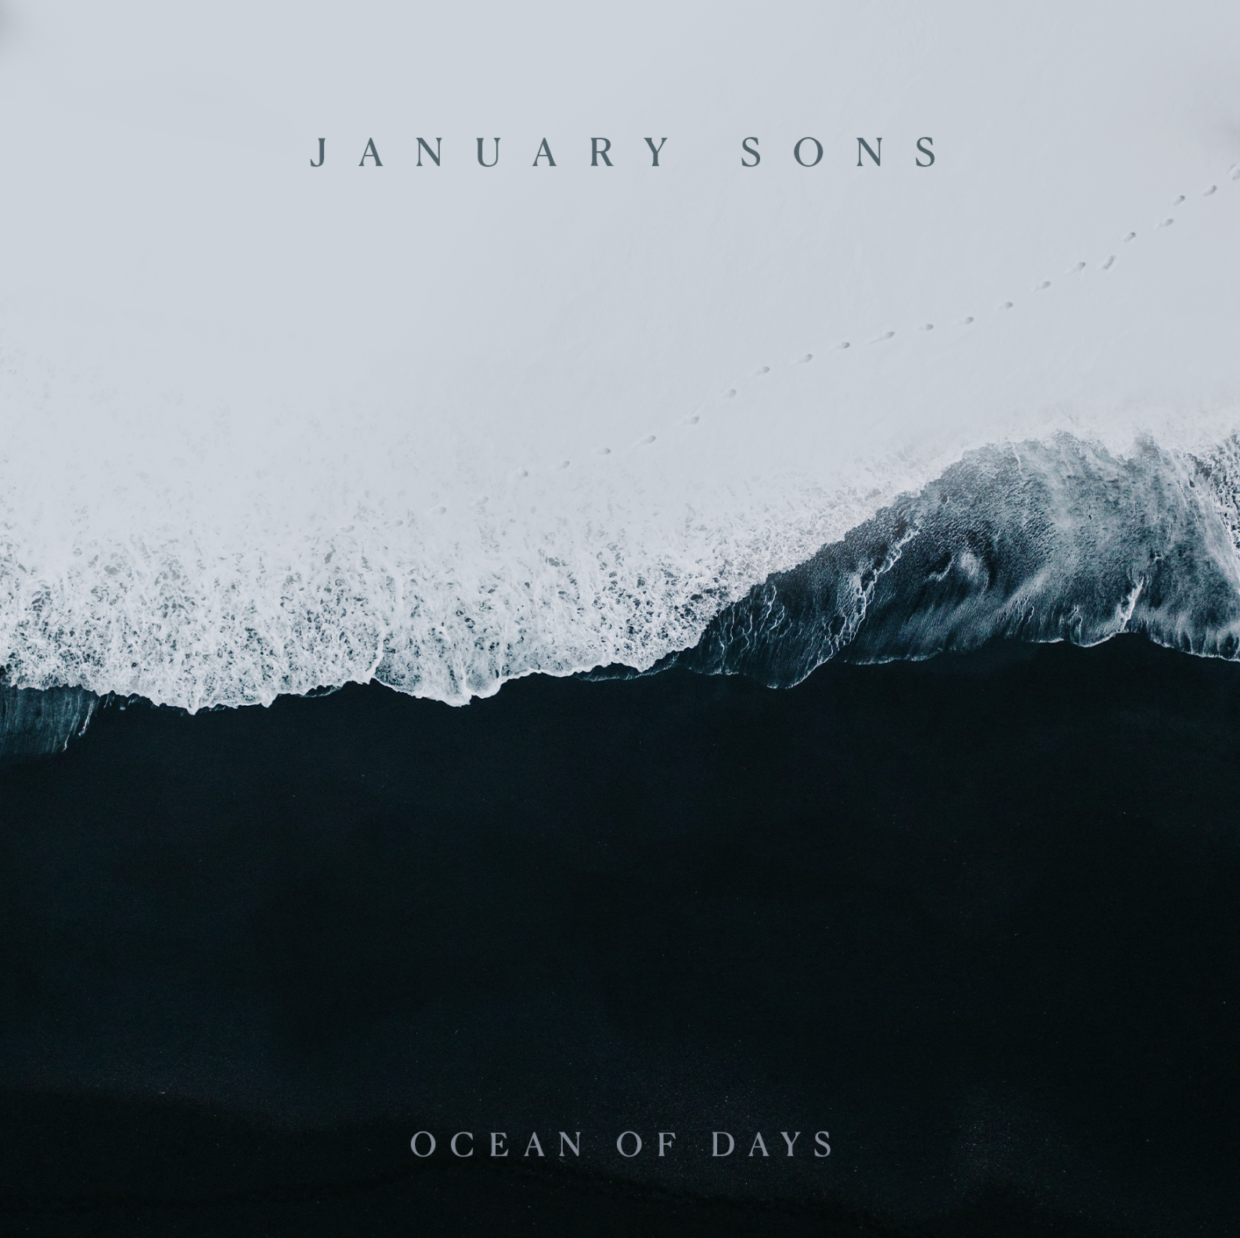 January sons discoverme